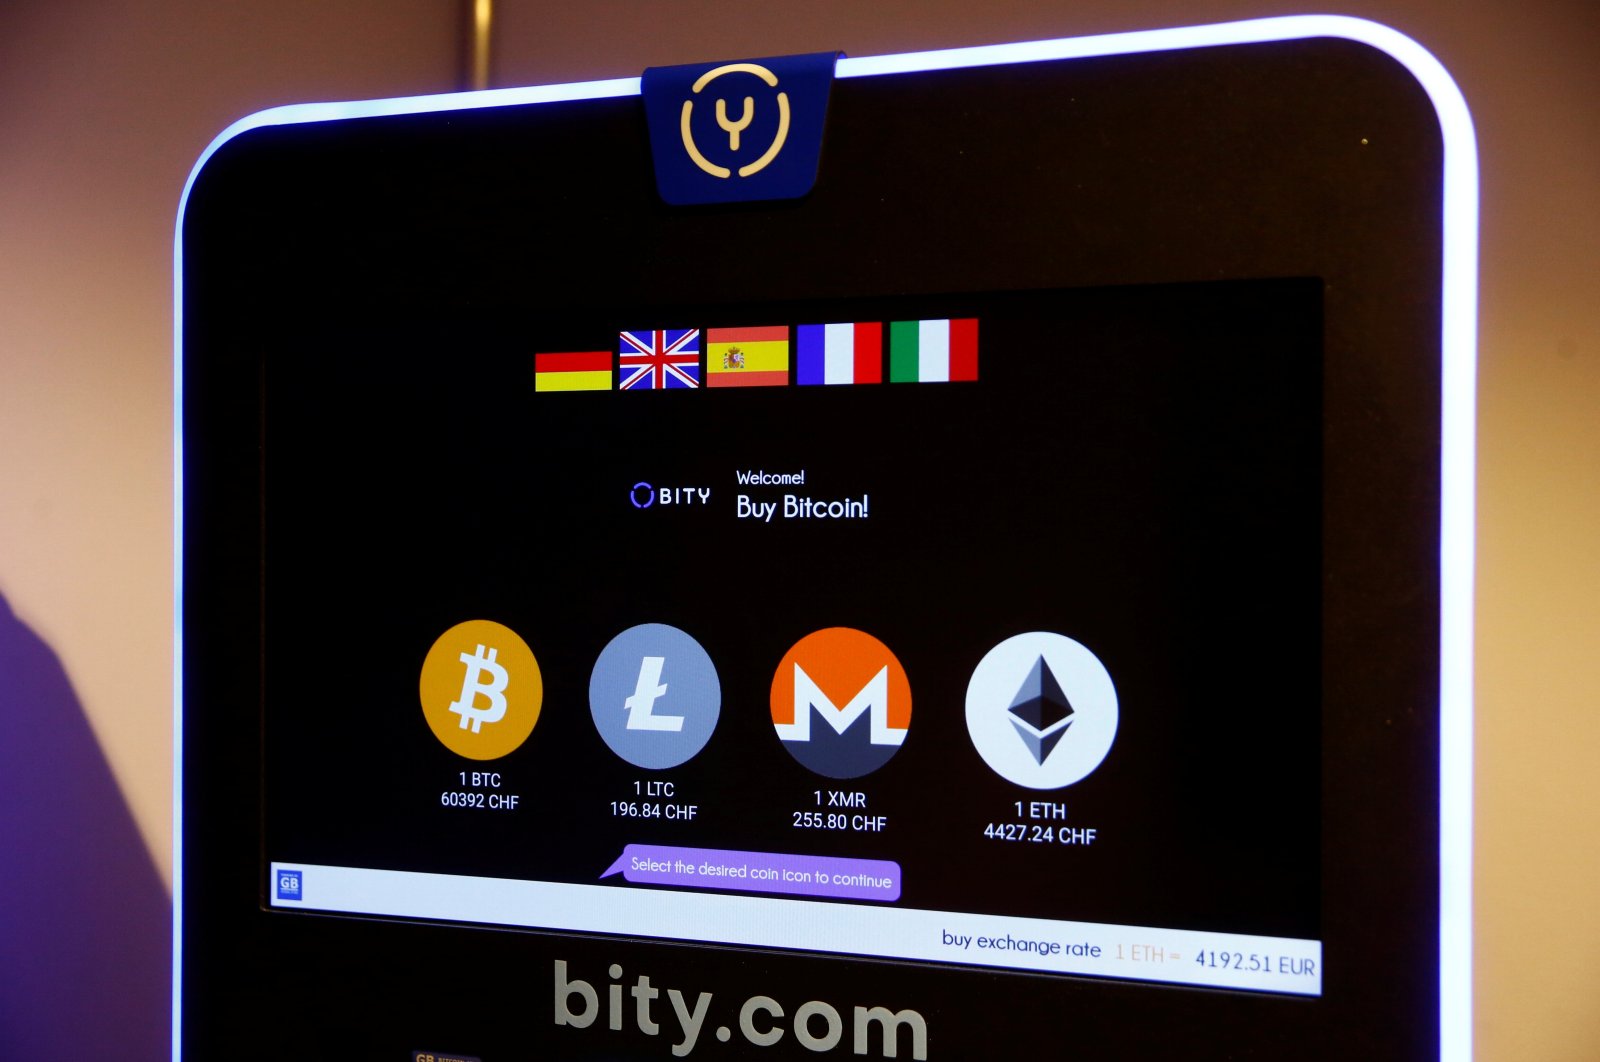 The logos and exchange rates of Bitcoin (BTH), Litecoin (LTC), Monero (XMR) and Ether (ETH) to Swiss franc (CHF) are seen on the display of a cryptocurrency ATM of blockchain payment service provider Bity at the House of Satoshi bitcoin and blockchain shop in Zurich, Switzerland, Nov. 4, 2021. (Reuters Photo)